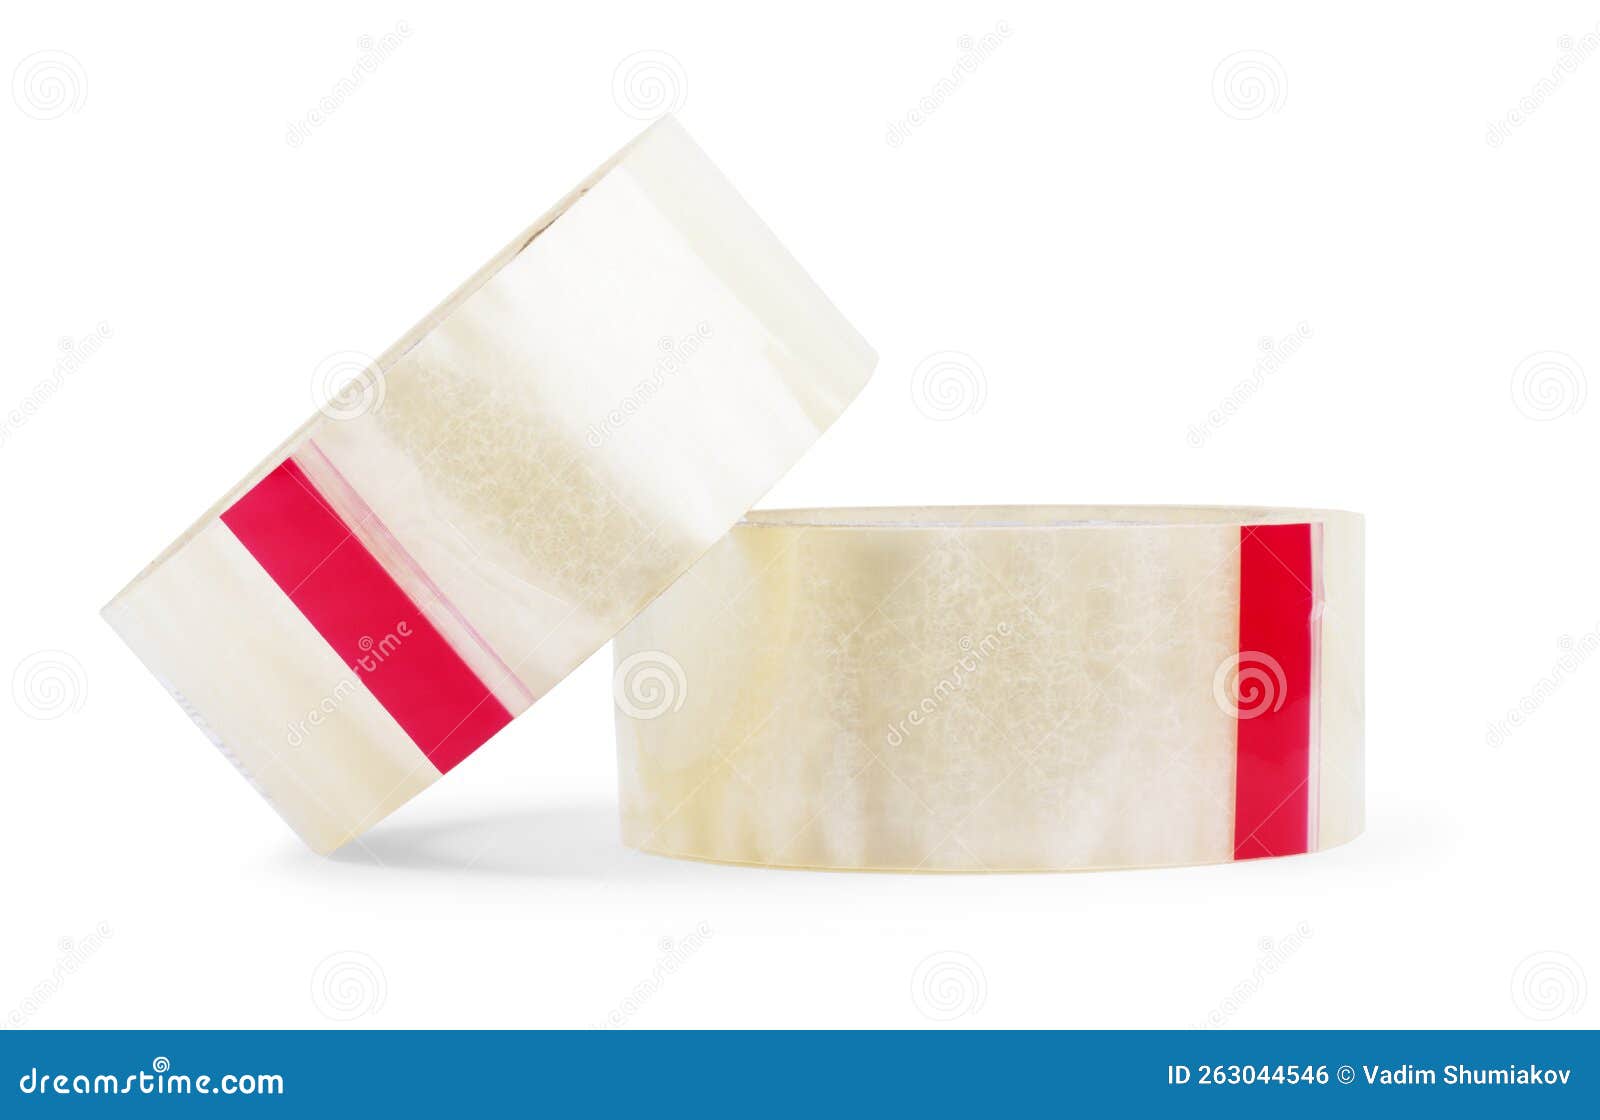 two rolls of adhesive tape